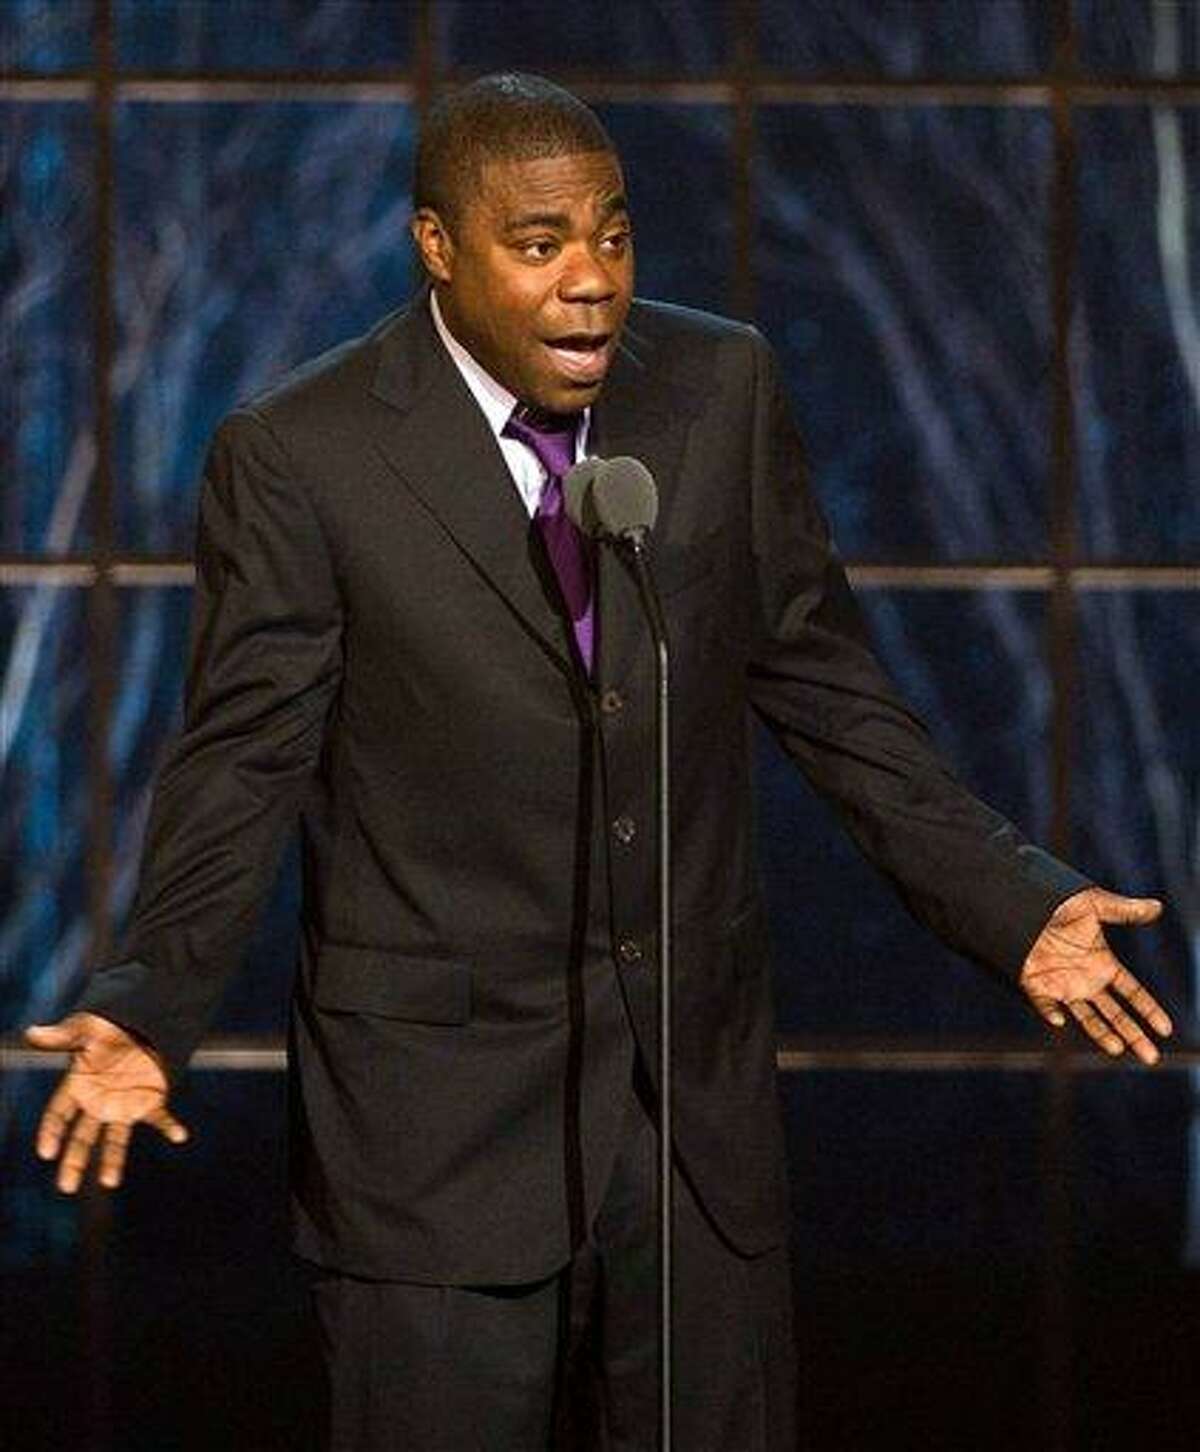 In this file photo, actor and comedian Tracy Morgan appears onstage at the ?The Comedy Awards? presented by Comedy Central in New York. Morgan says he's sorry for telling an audience that he would "pull out a knife and stab" his son for being gay. The comedian and "30 Rock" actor apologized Friday, to his fans and the gay and lesbian community for what he called "my choice of words" during his June 3 appearance at Nashville's Ryman Auditorium.